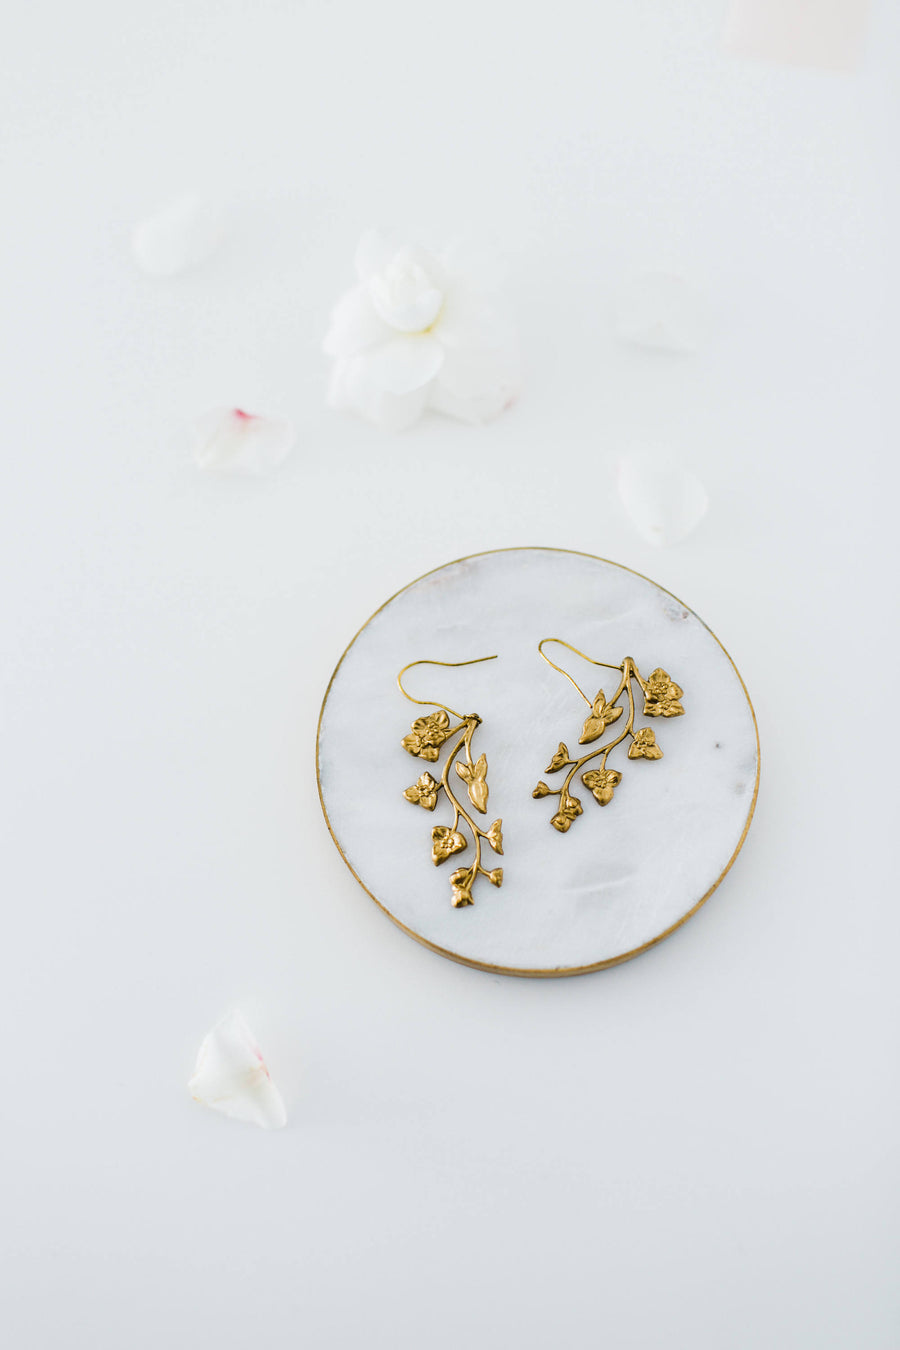 Earrings made of gold leaves and flowers